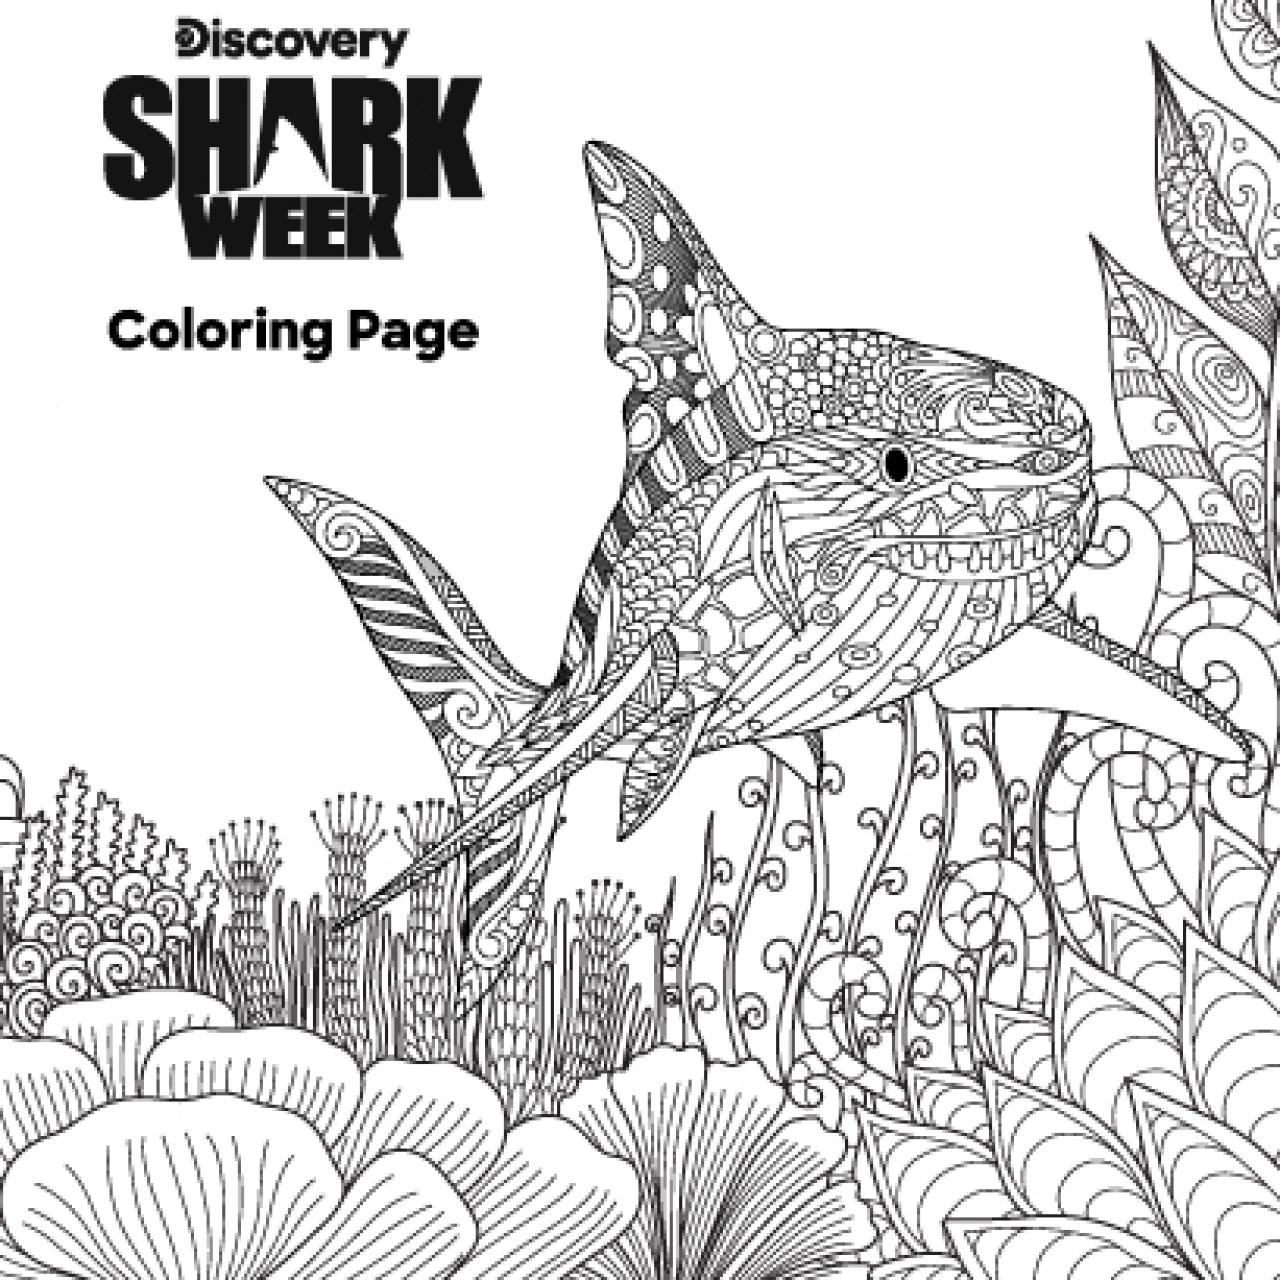 Shark Week Coloring Page The Latest Shark Week 2024 News on Discovery